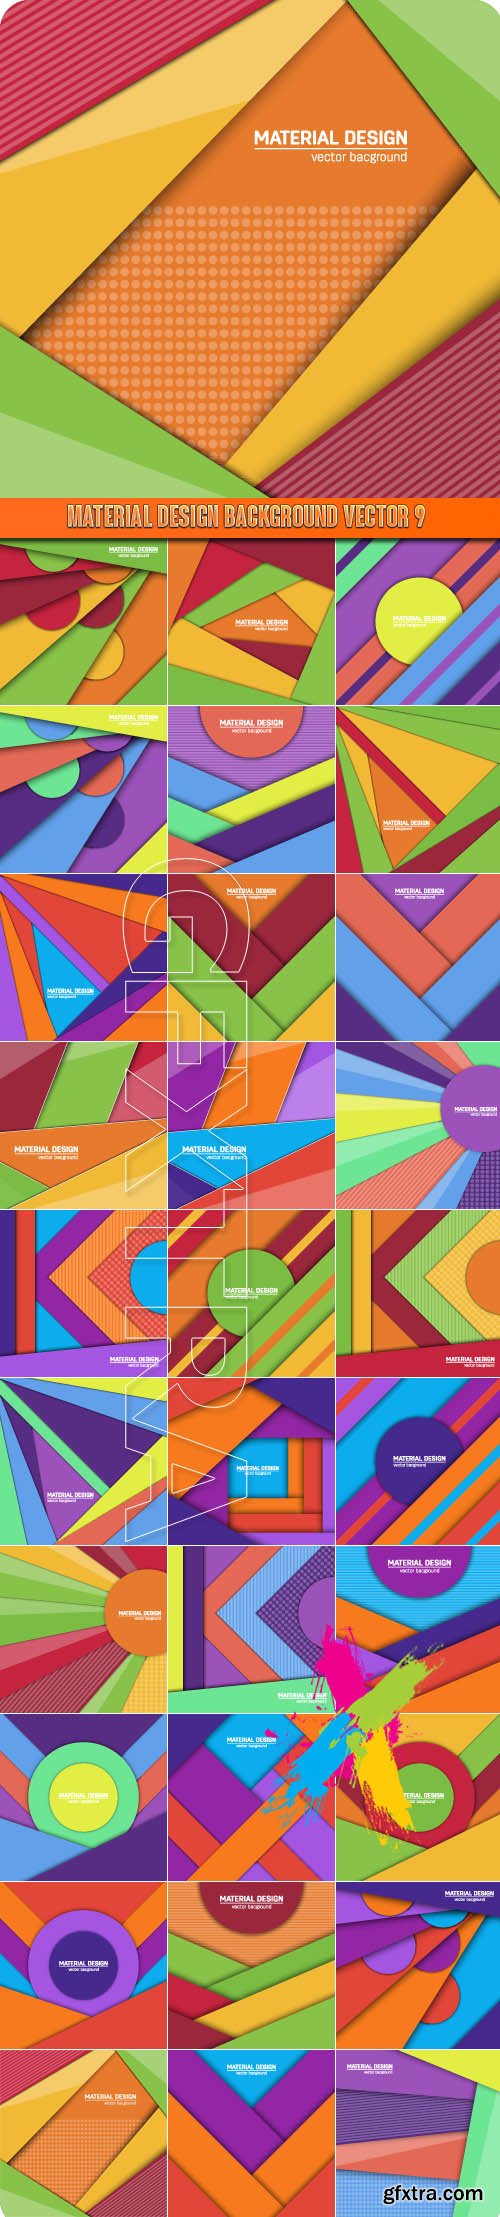 Material design background vector 9